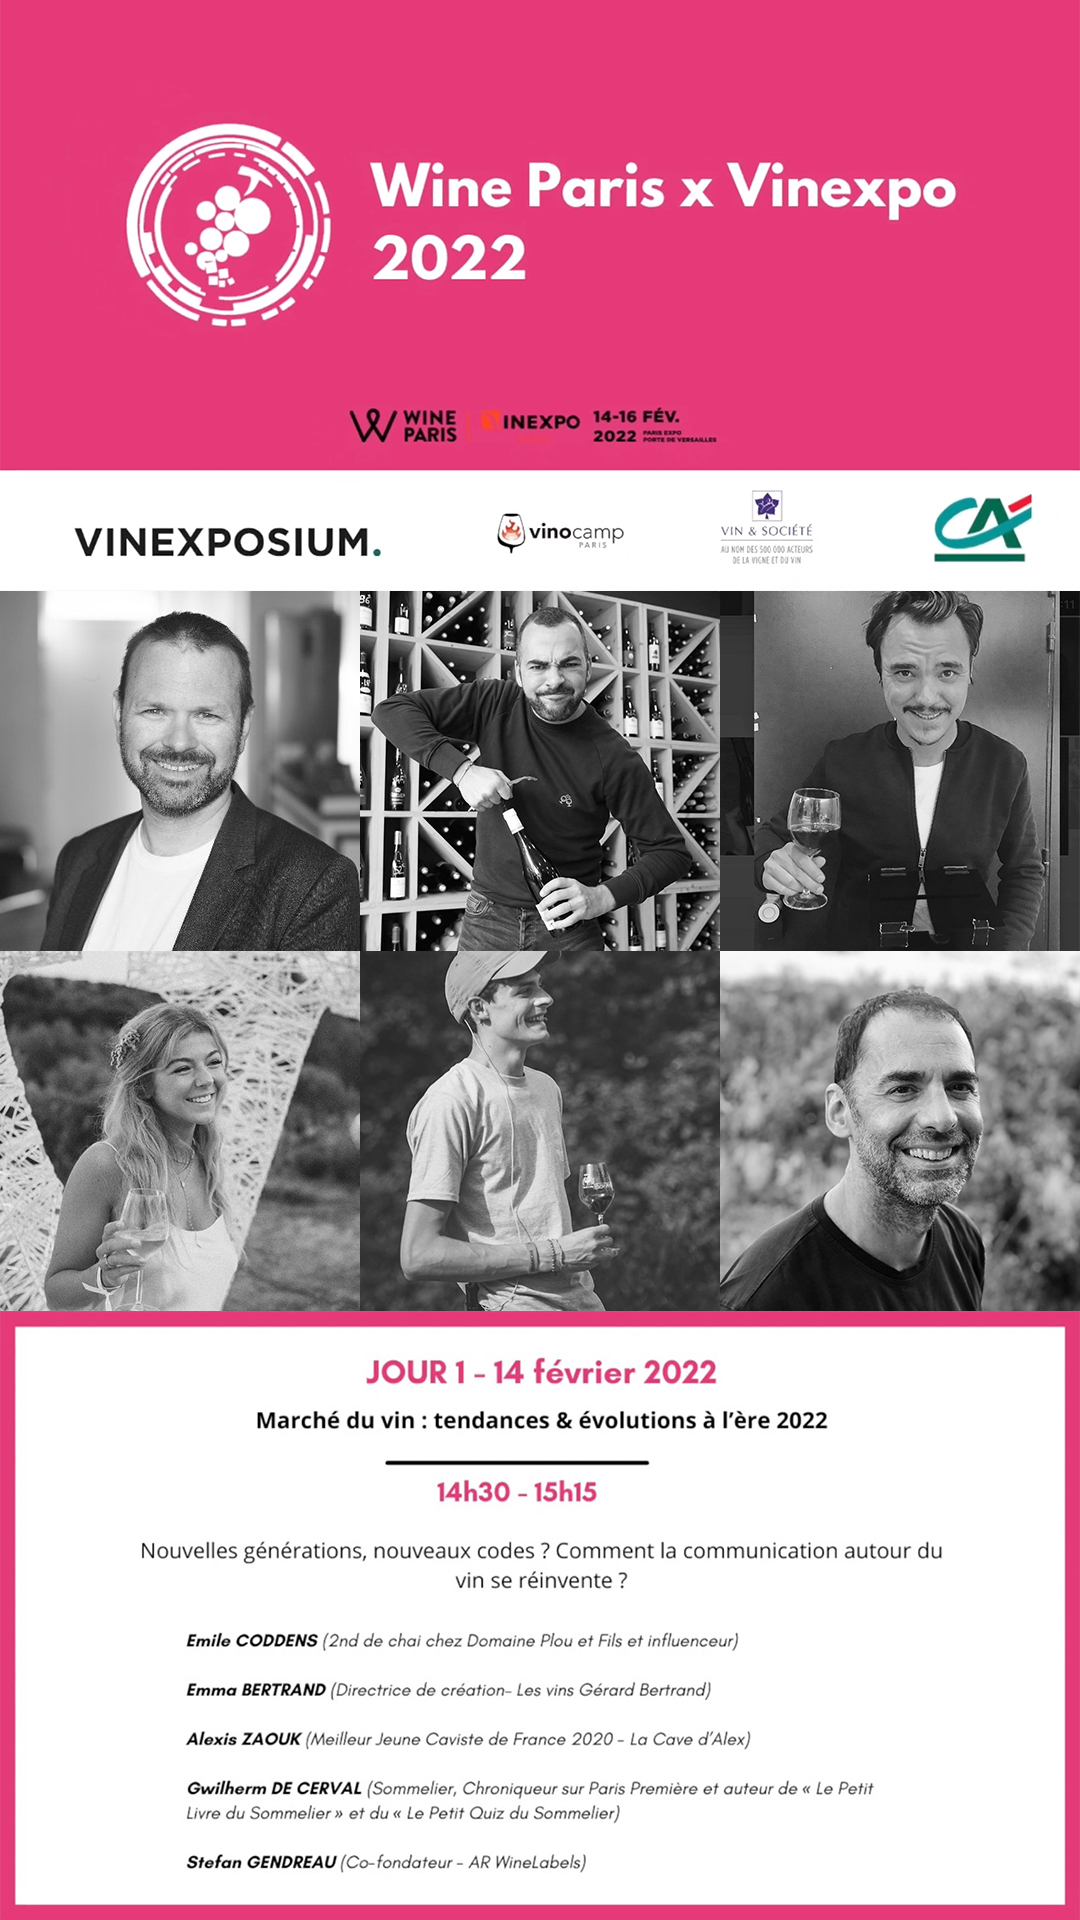 WineParis 2022 Conference "New generations, new codes? How communication around wine is being reinvented?"